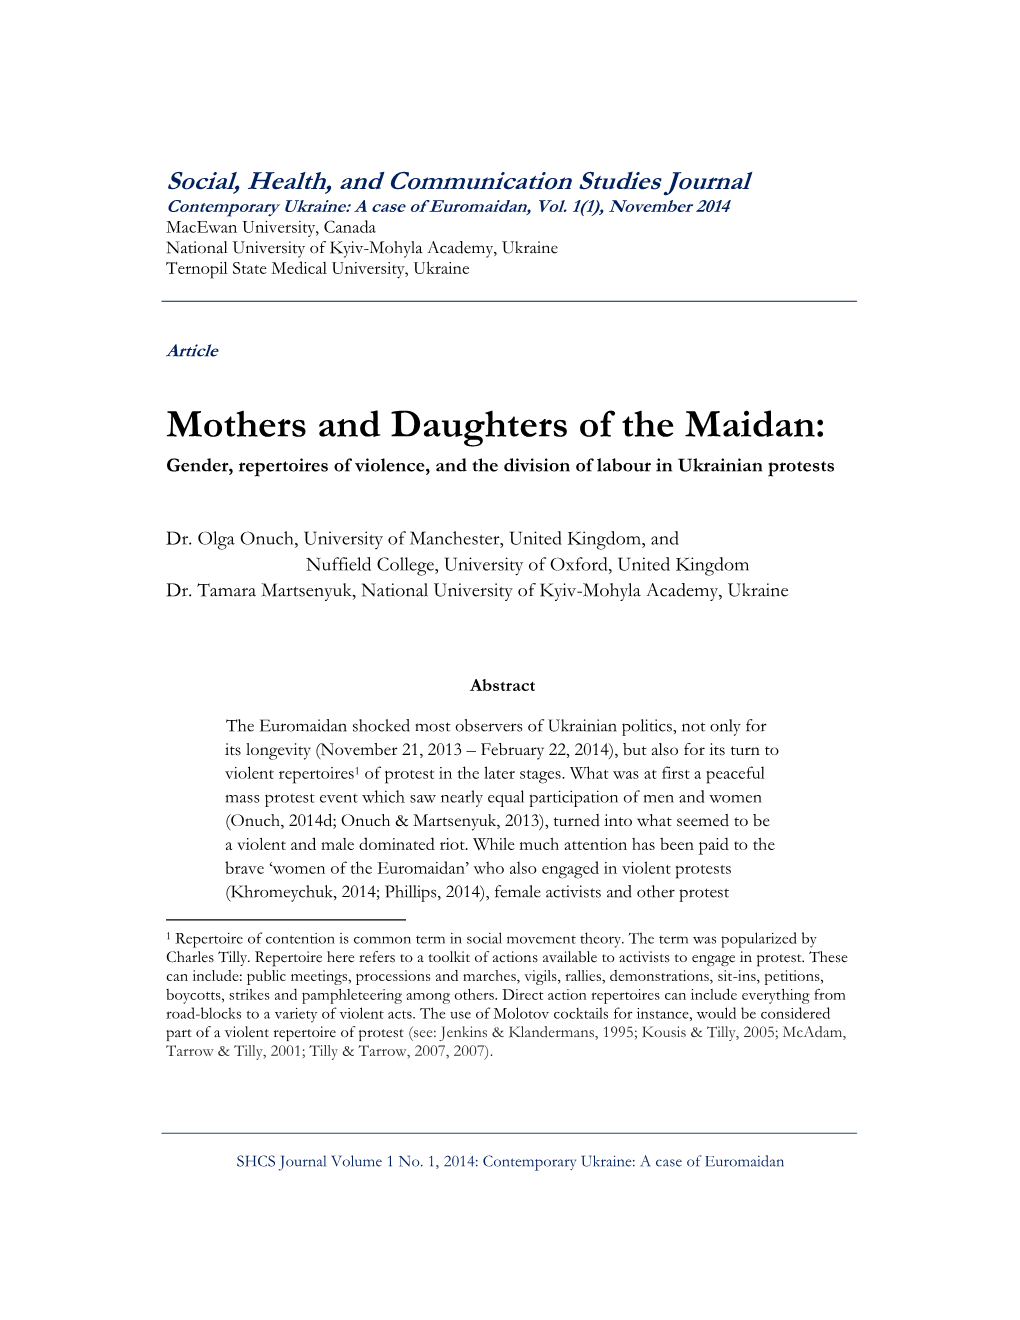 Mothers and Daughters of the Maidan: Gender, Repertoires of Violence, and the Division of Labour in Ukrainian Protests